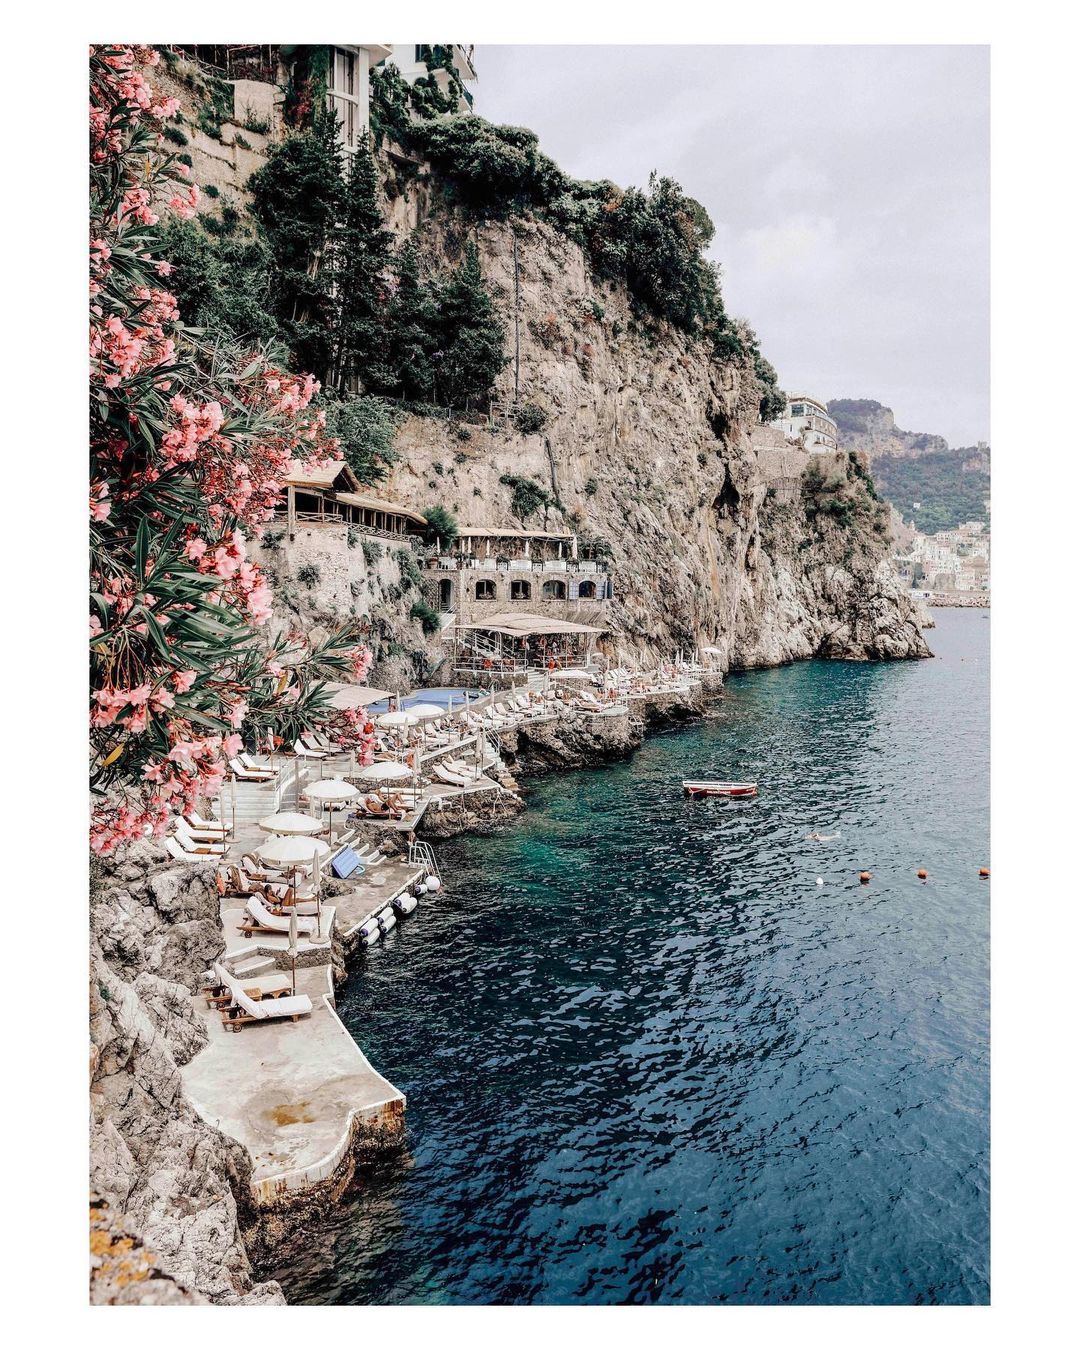 Travel Inspiration | Around the World by Instagram in 10 Beautiful Images — Vol. 01, No. 01